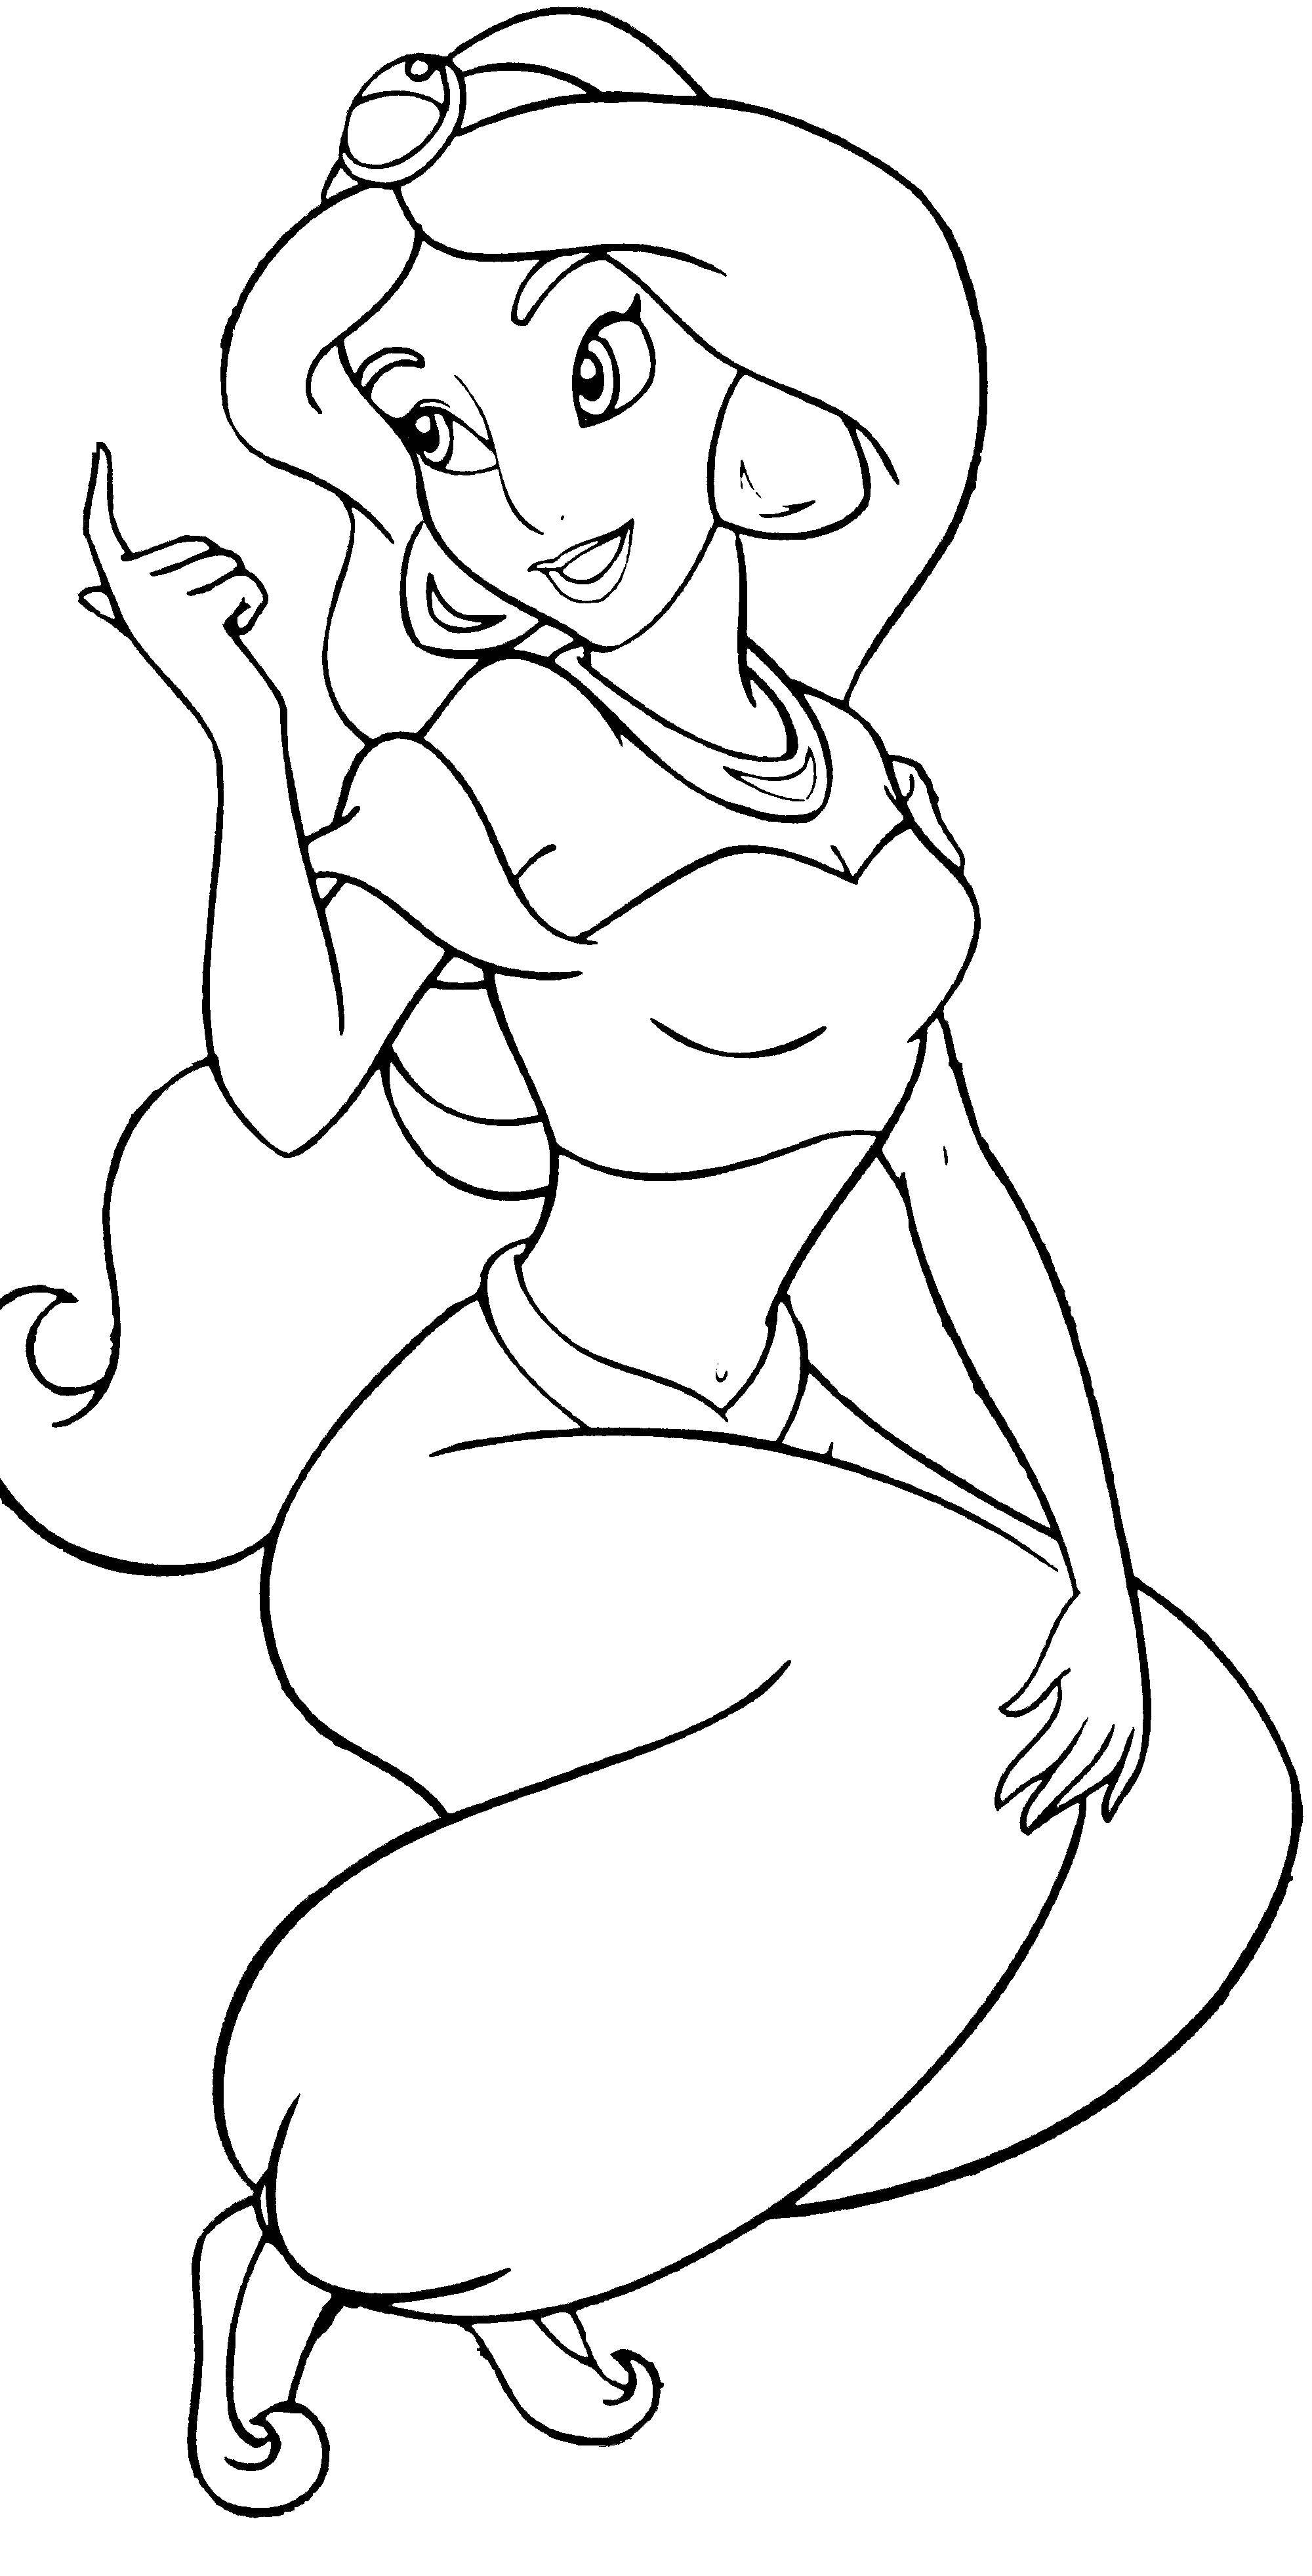 Coloring Jasmine.. Category Disney coloring pages. Tags:  Disney, Aladdin, Jasmine.